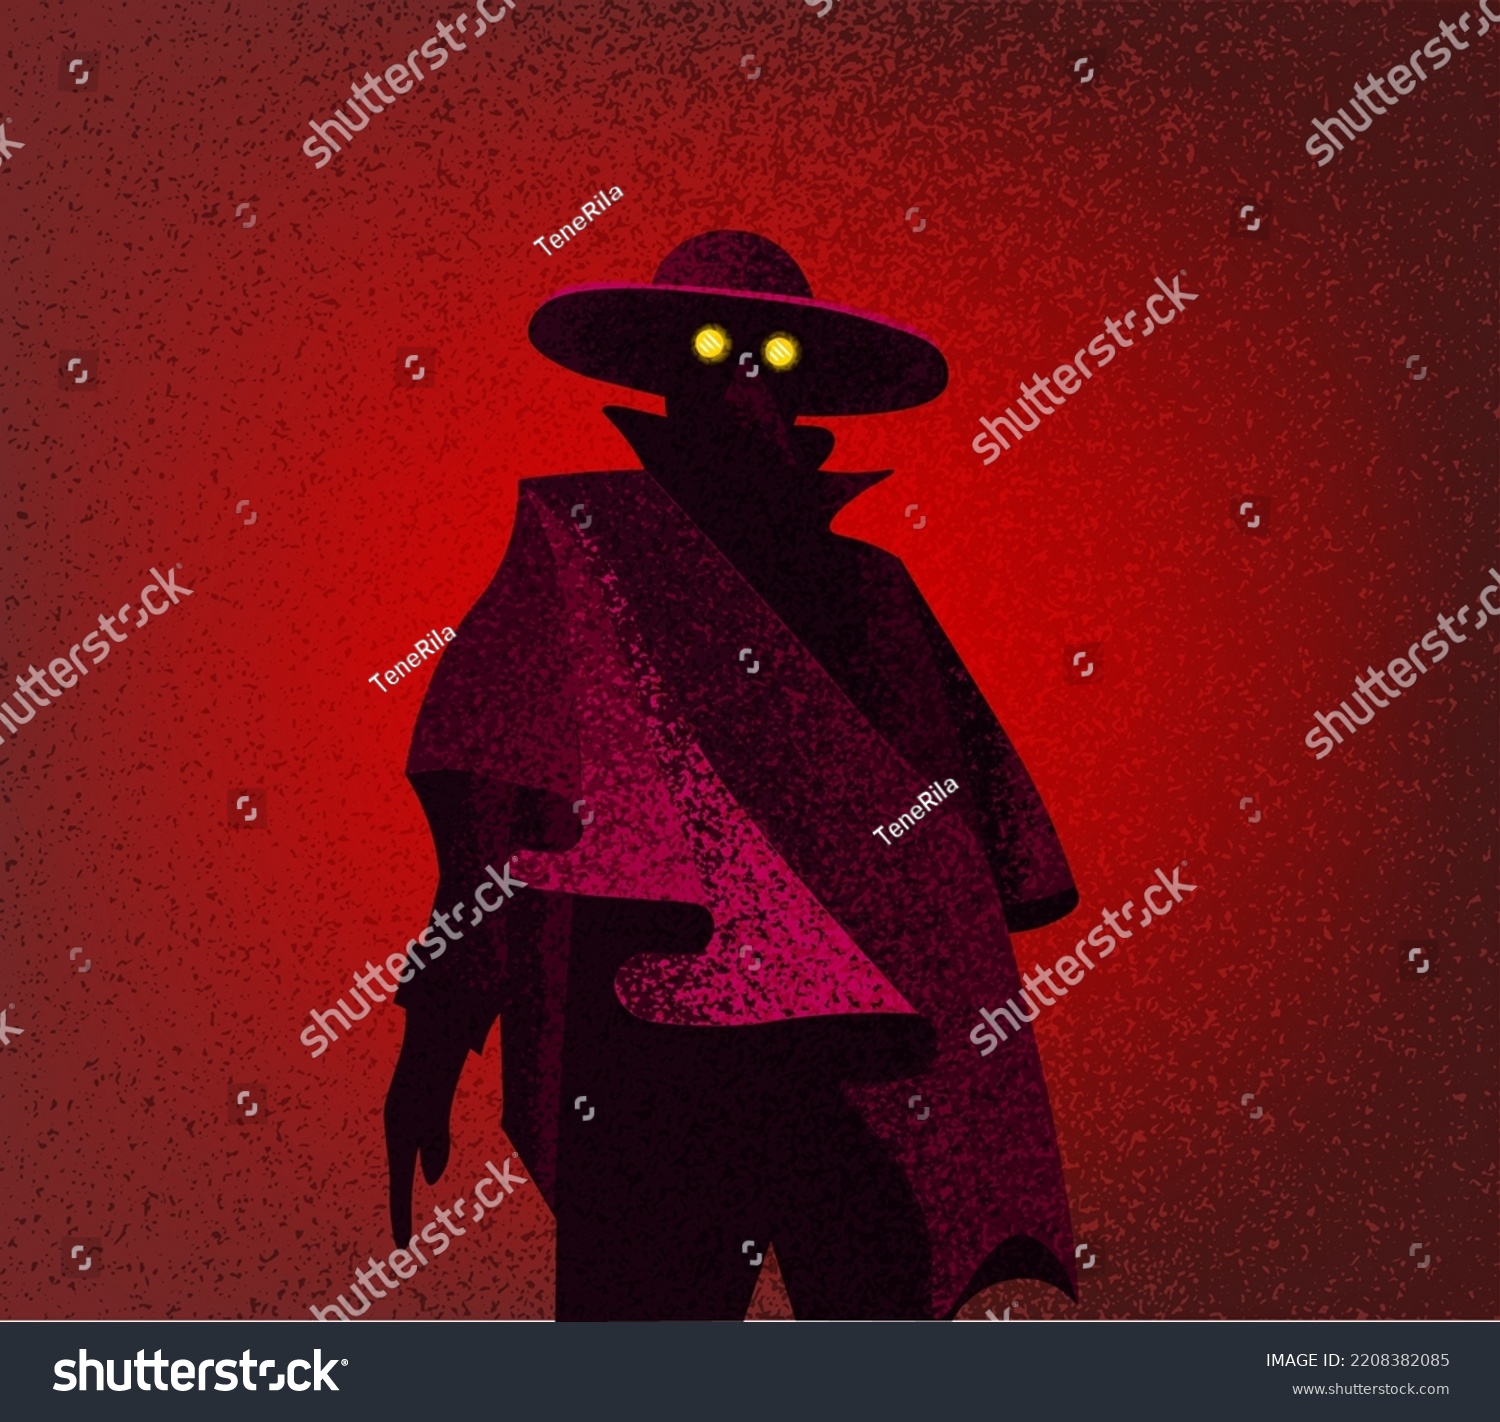 SVG of The plague doctor. Scary and frightening atmosphere. Very stylish and special design. Perfect for printing, interior decoration, as a poster design. svg